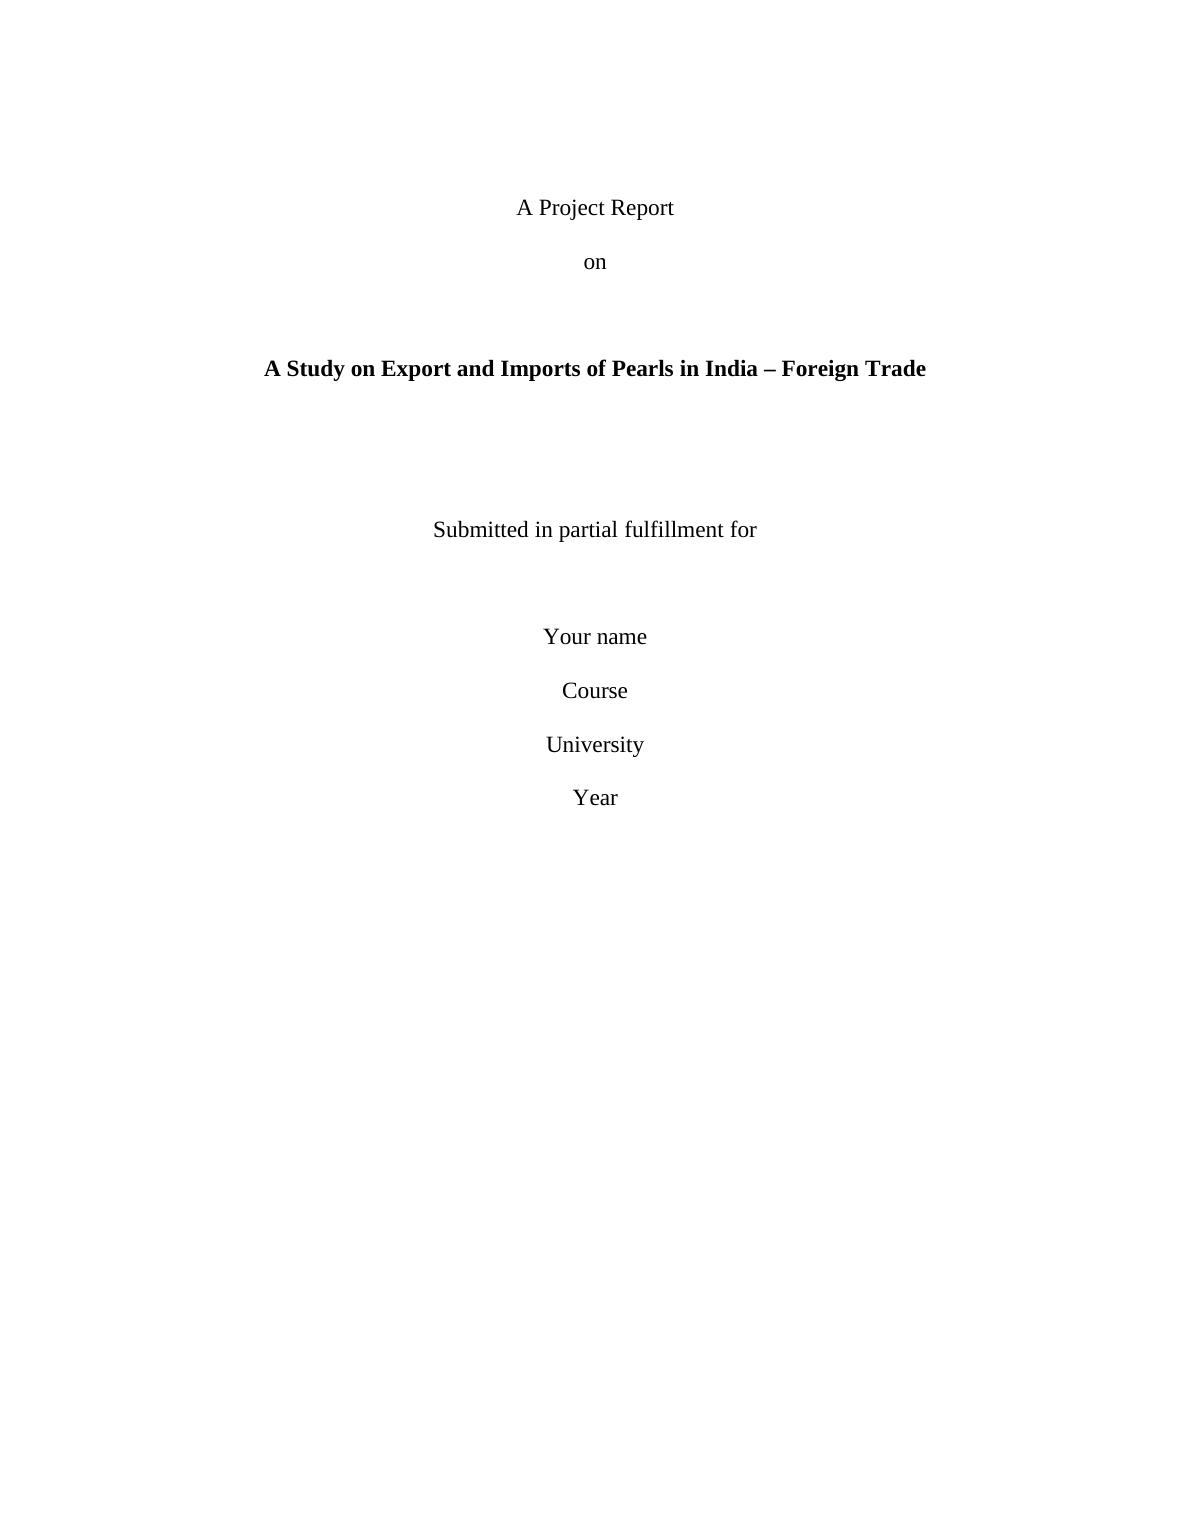 A Study on Export and Imports of Pearls in India – Foreign Trade_1